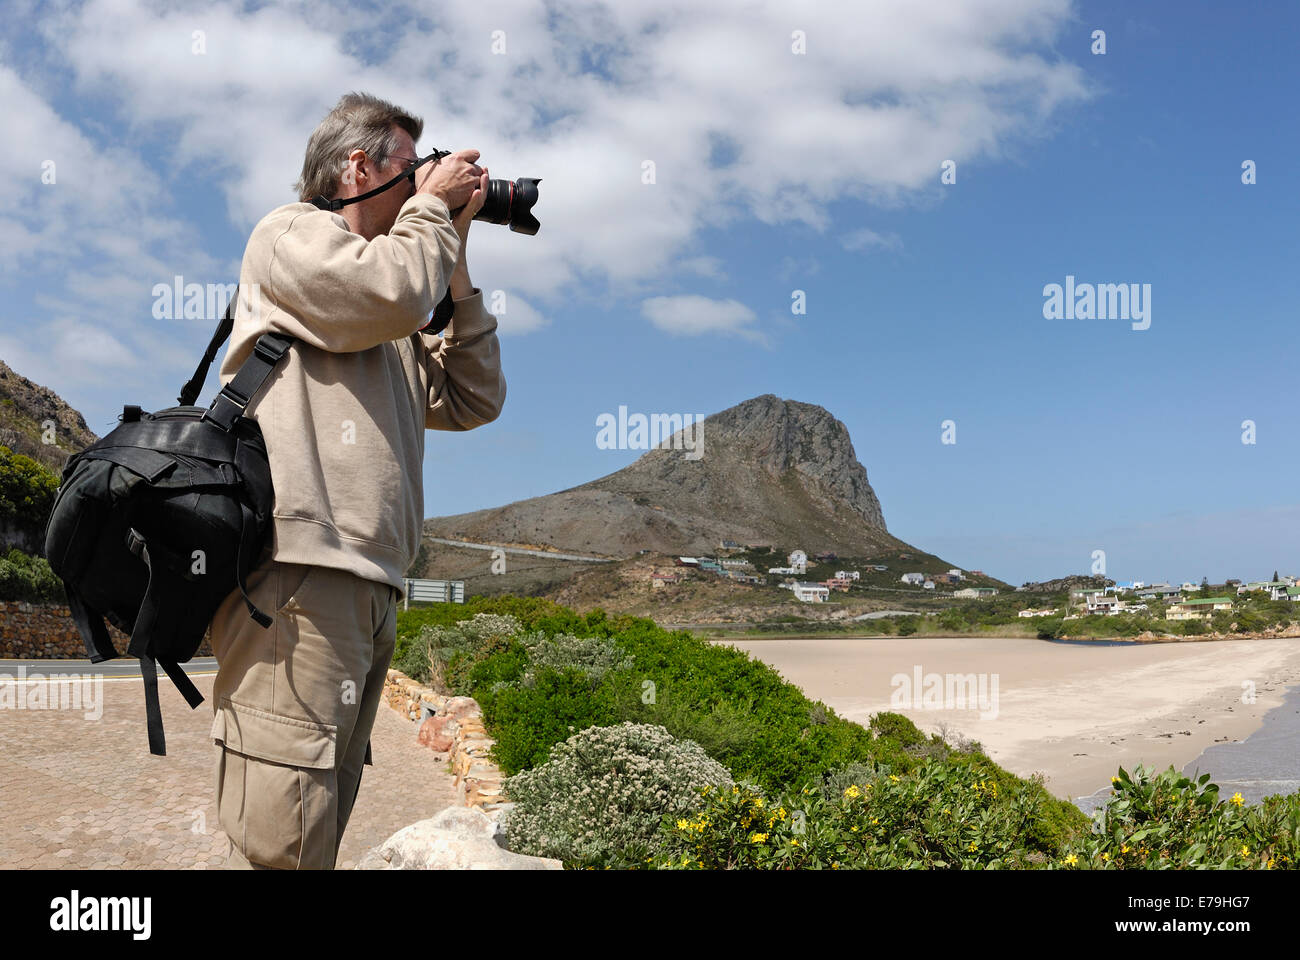 Man photographer taking photos of coastal landscape between Gordon's Bay and Betty's Bay, Western Cape Province, South Africa Stock Photo